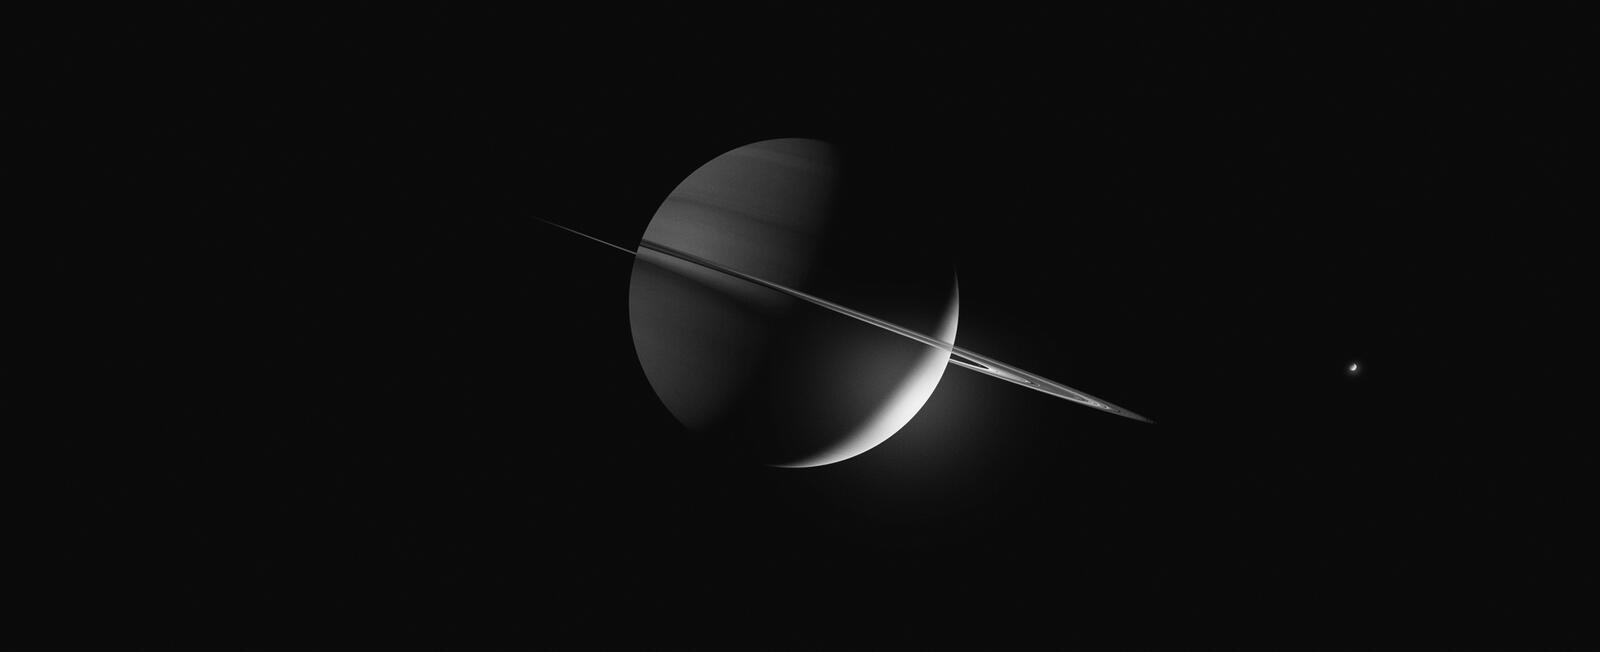 Wallpapers Saturn ring system planet on the desktop